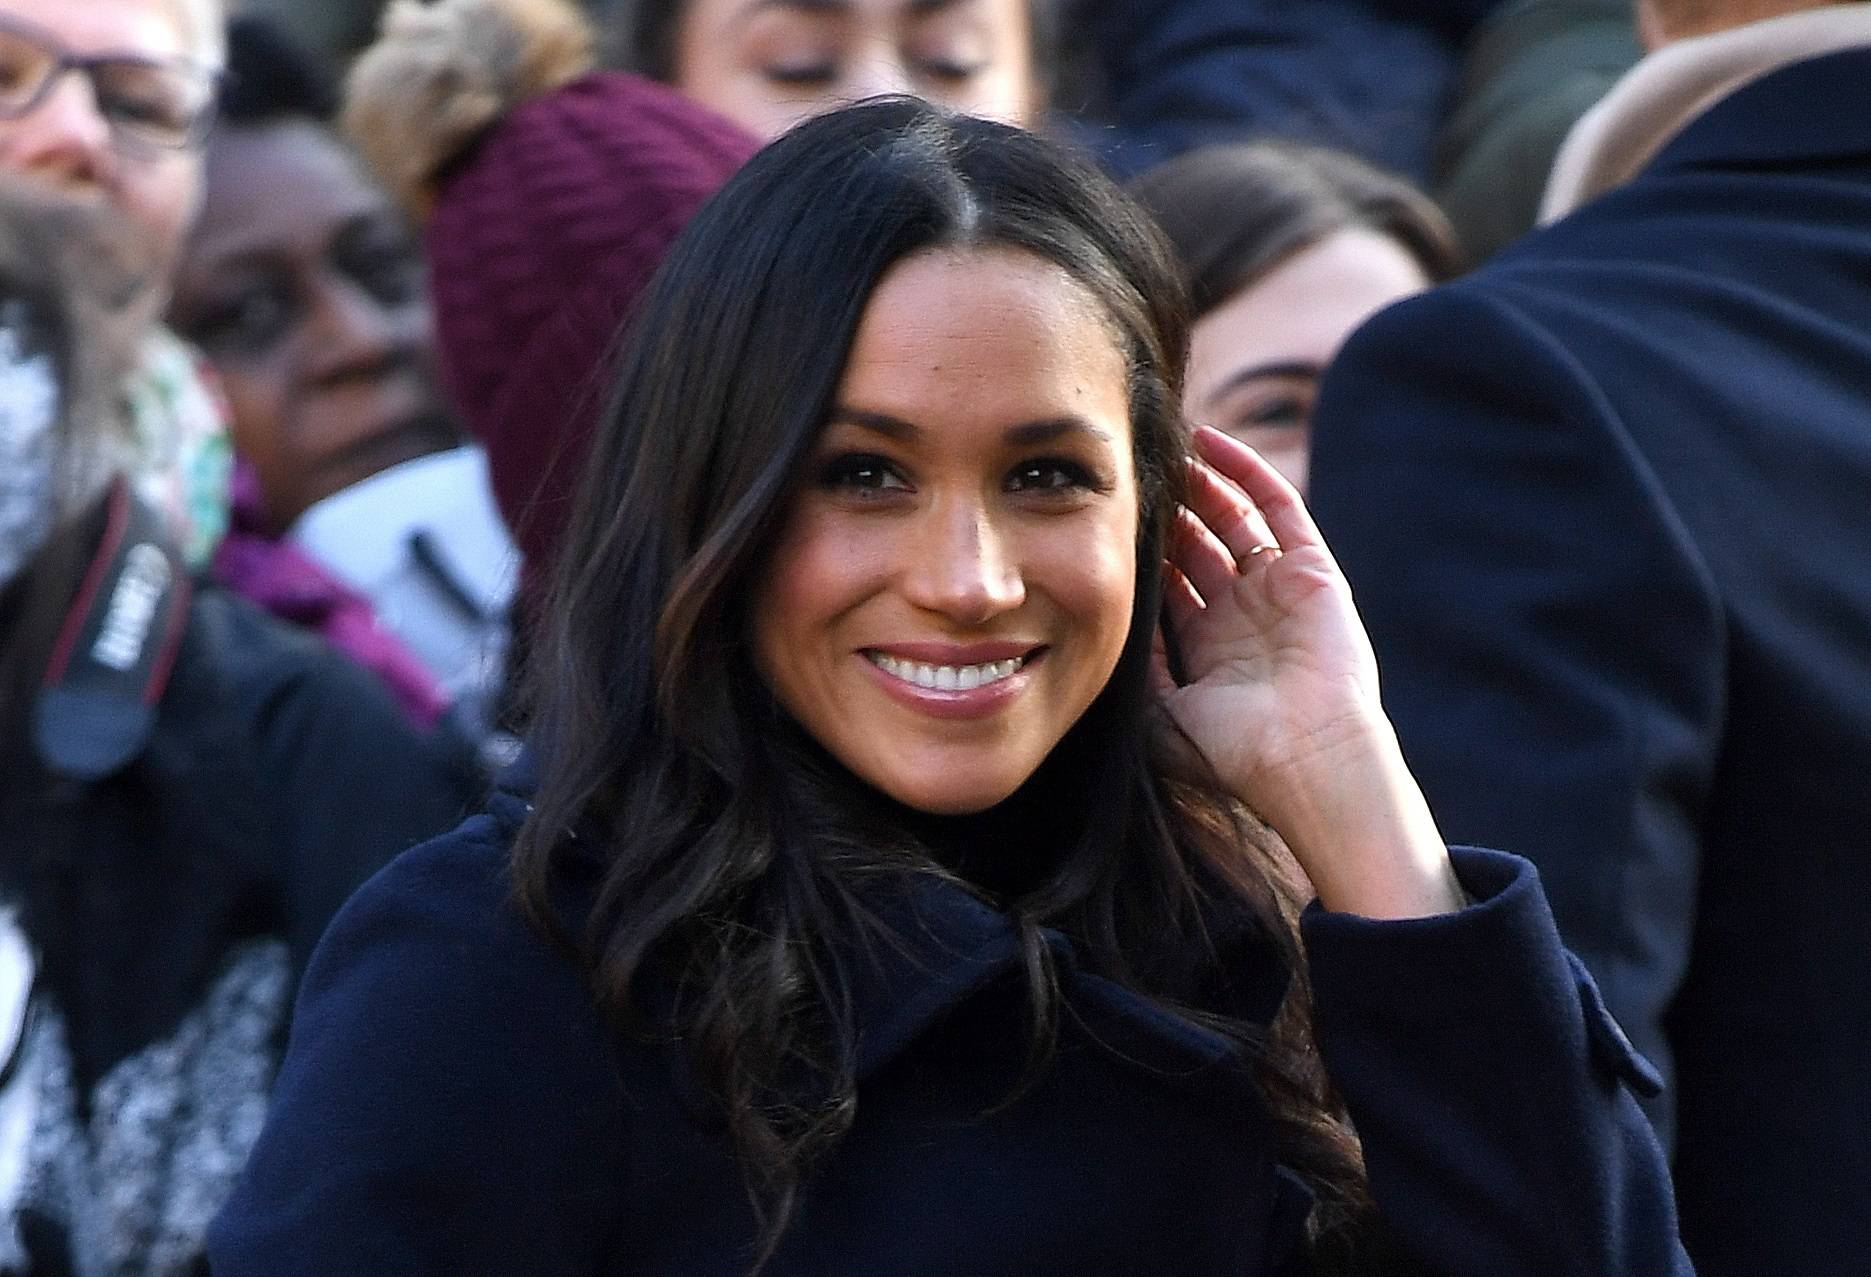 Prince Harry and Meghan Markle visit to Nottingham